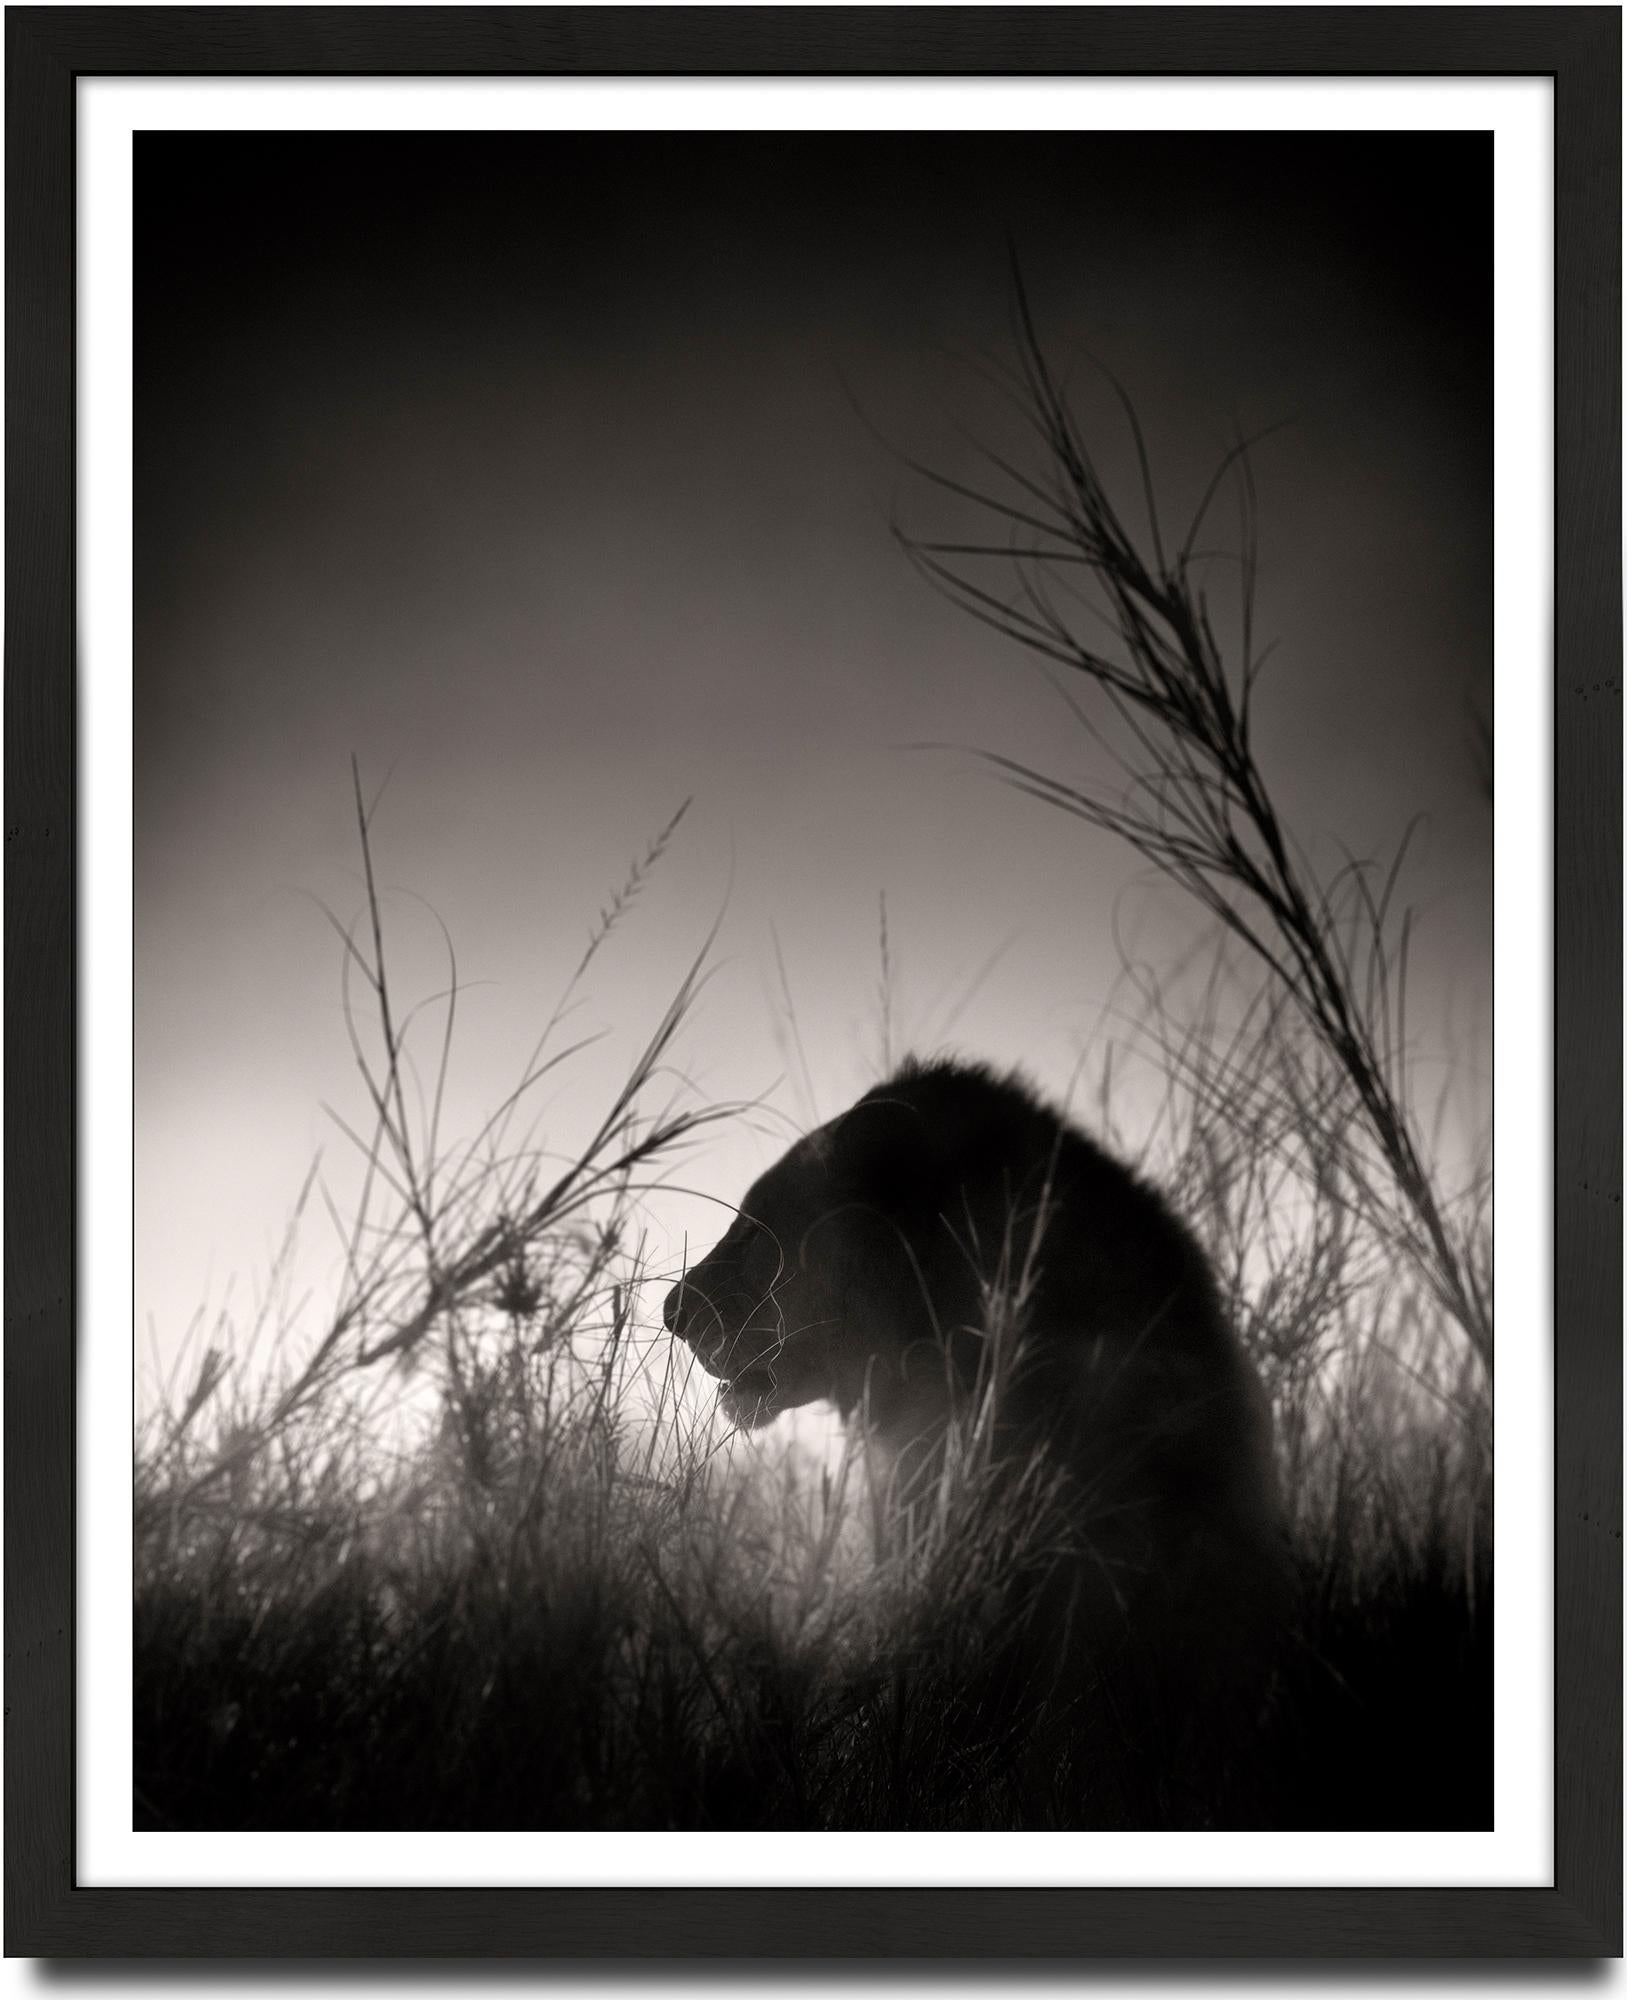 Lion King, animal, wildlife, black and white photography, africa - Photograph by Joachim Schmeisser